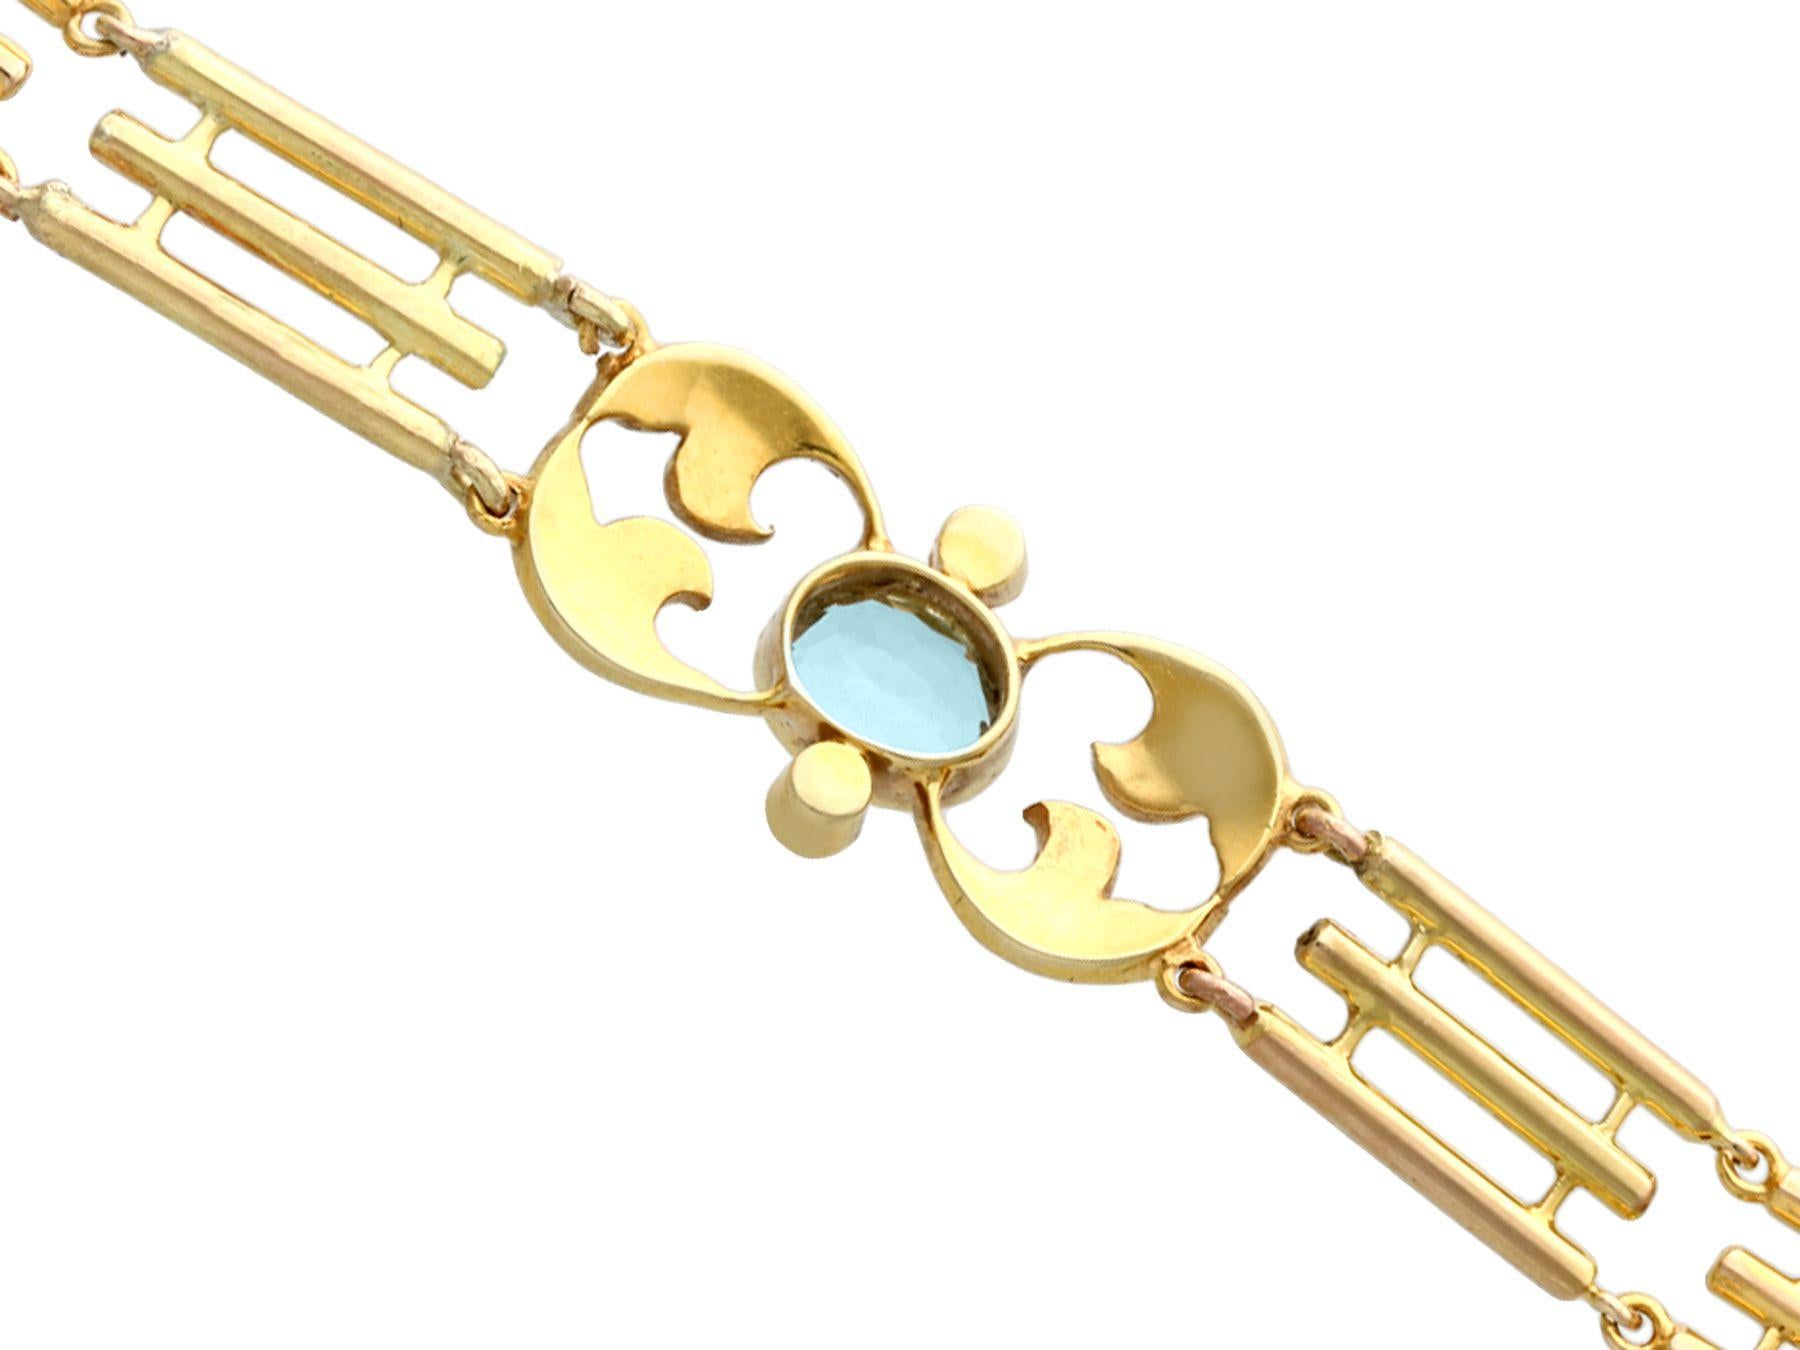 1920s 2.55 Carat Aquamarine and Seed Pearl Yellow Gold Gate Bracelet For Sale 1